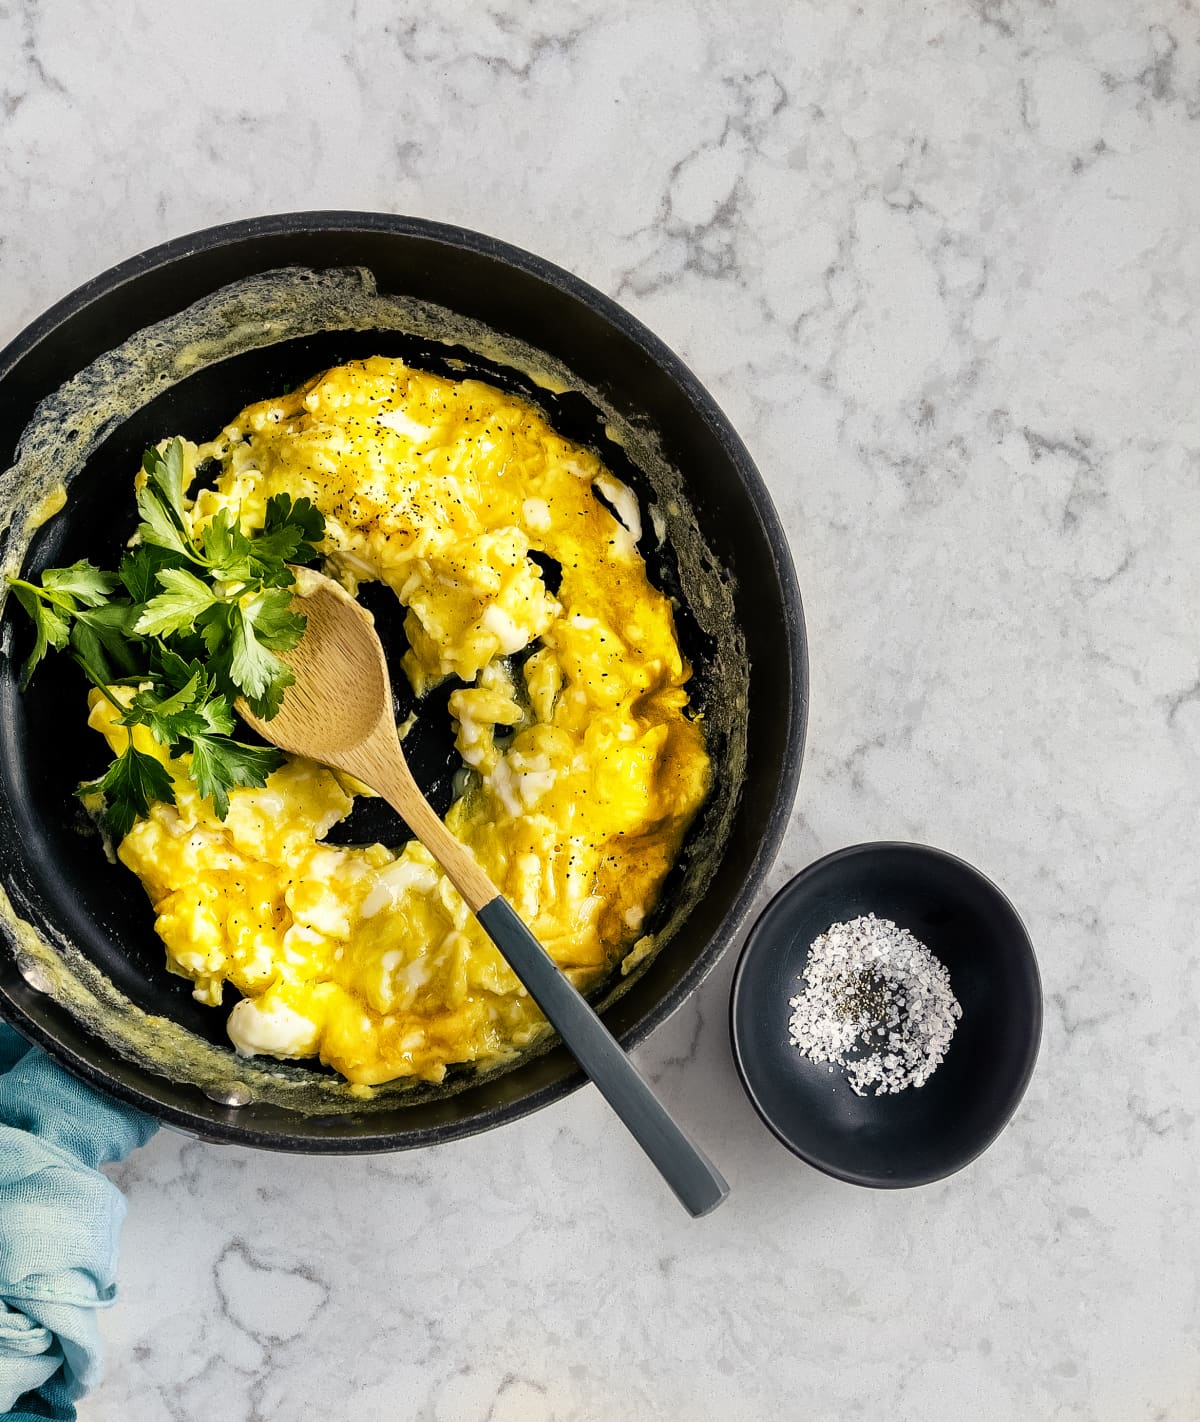 Scrambled eggs in a skillet on a white, marble background